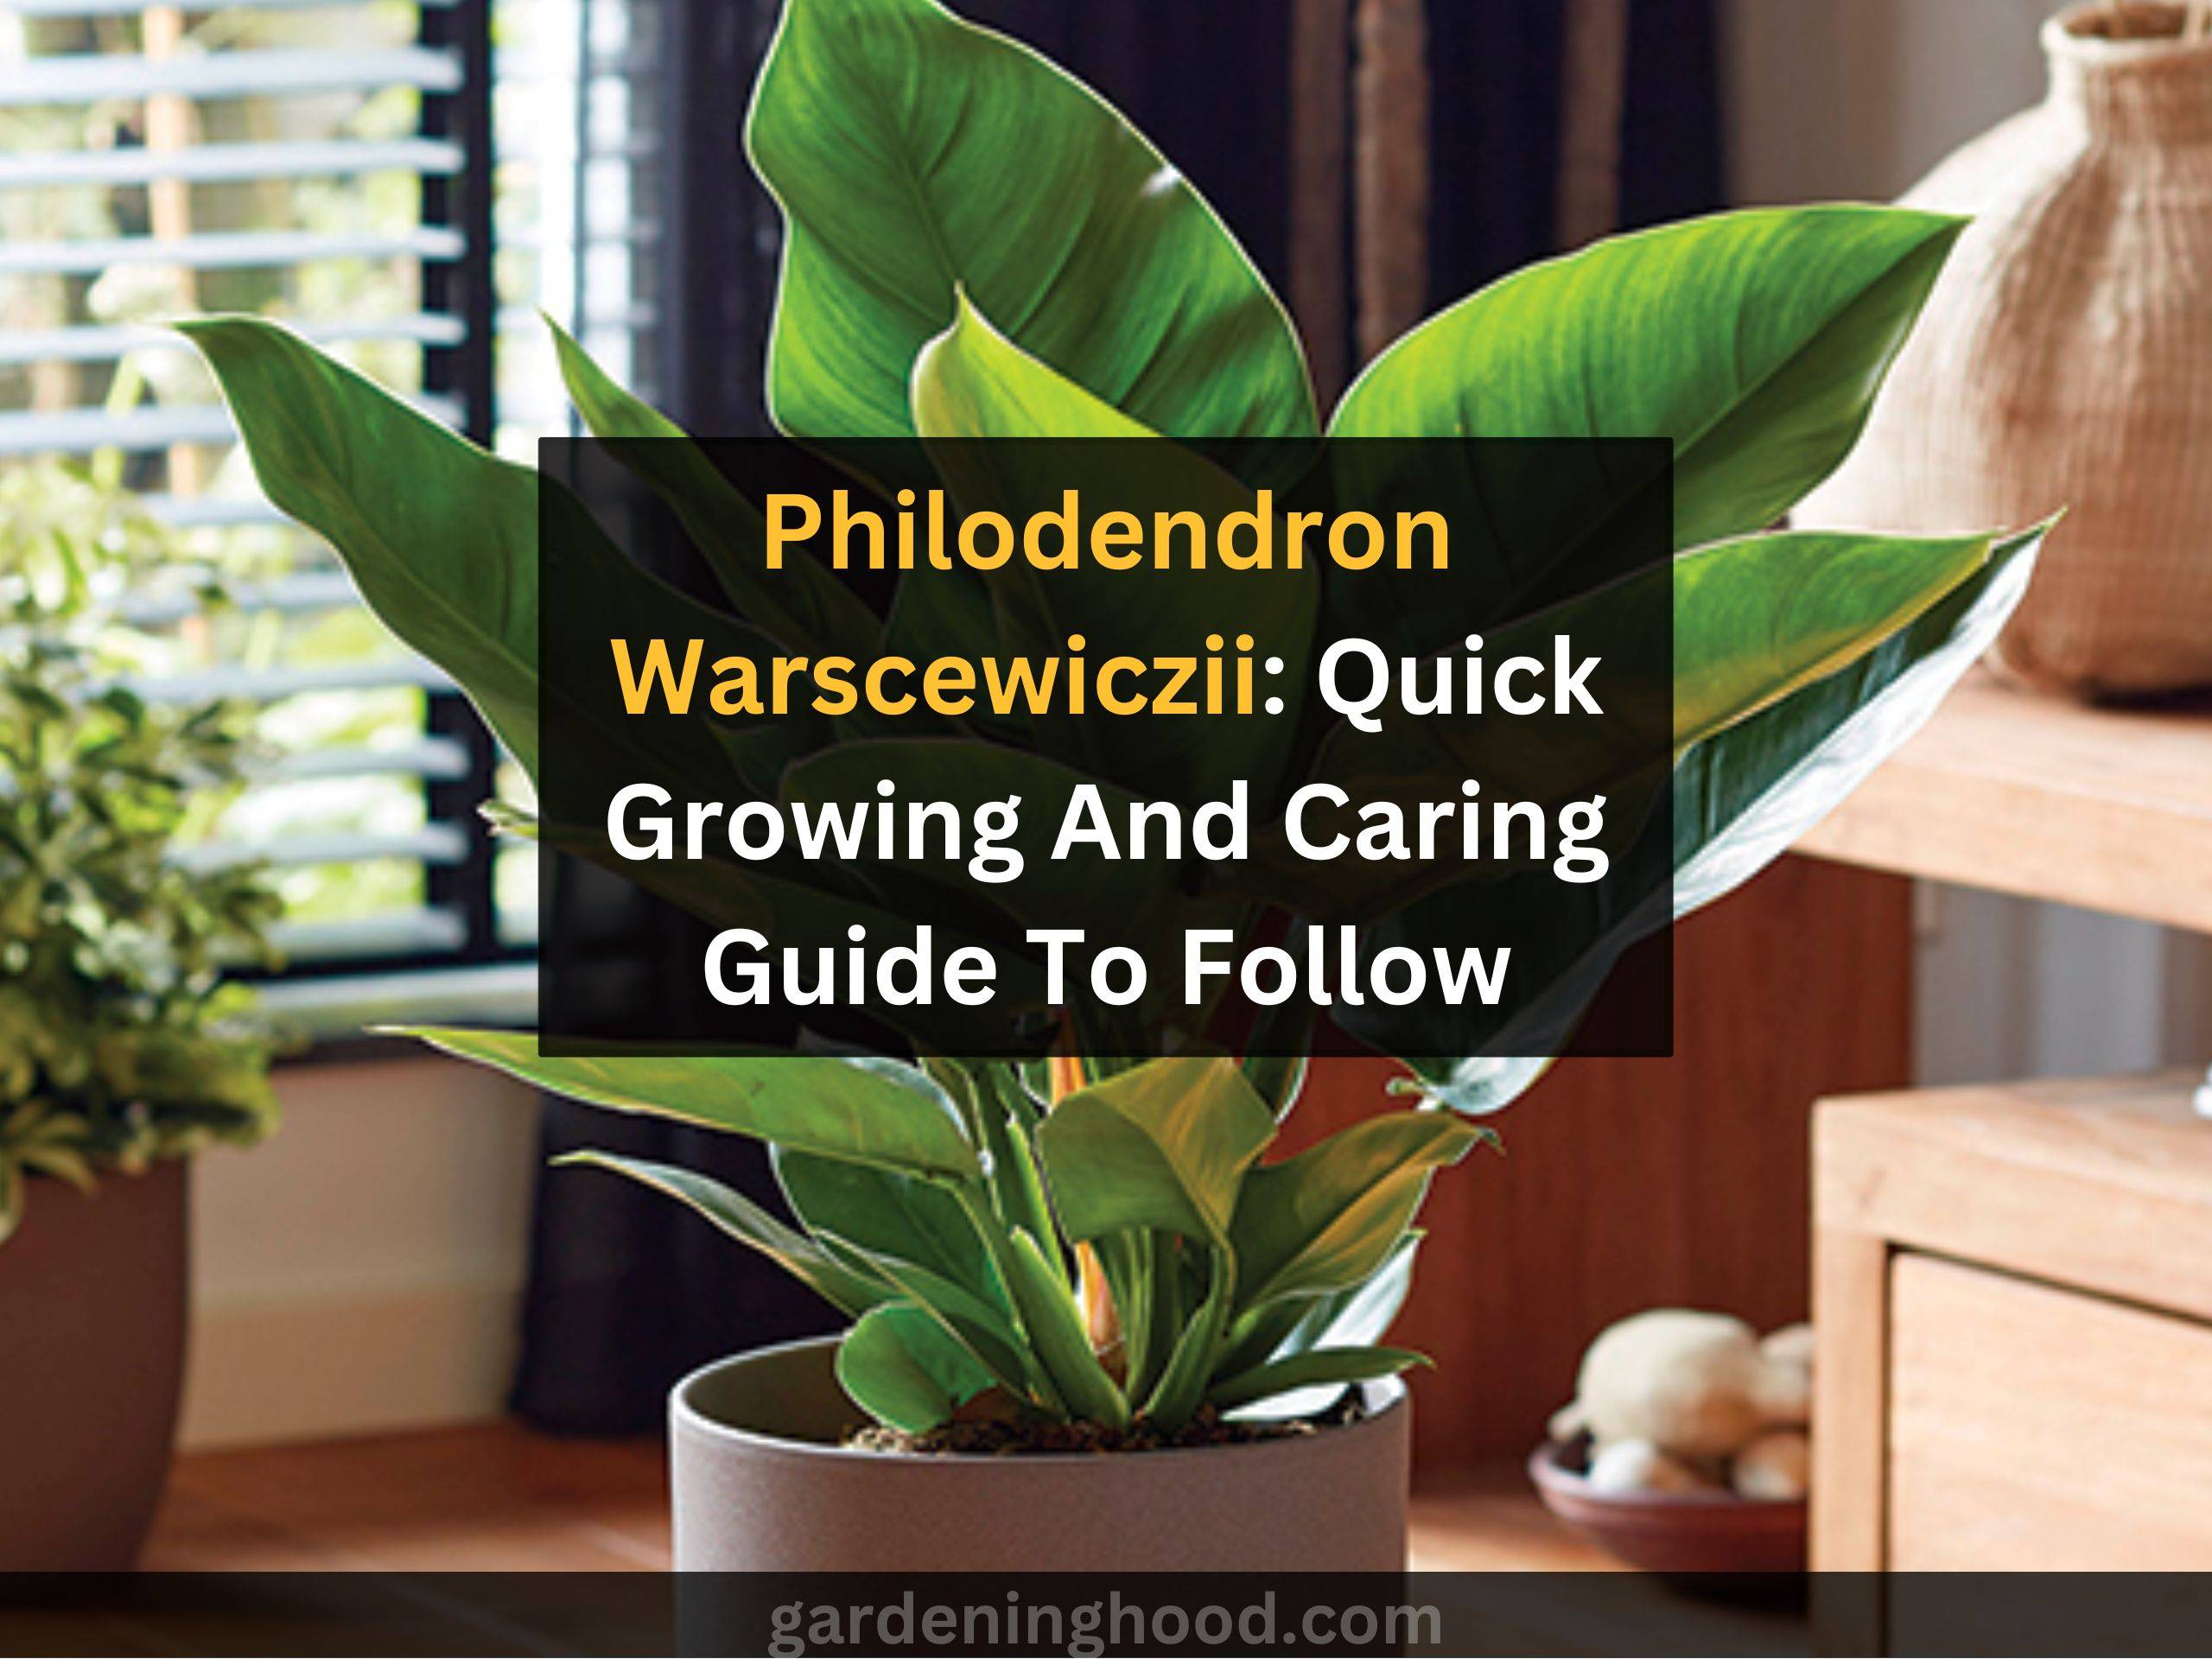 Philodendron Warscewiczii: Quick Growing And Caring Guide To Follow